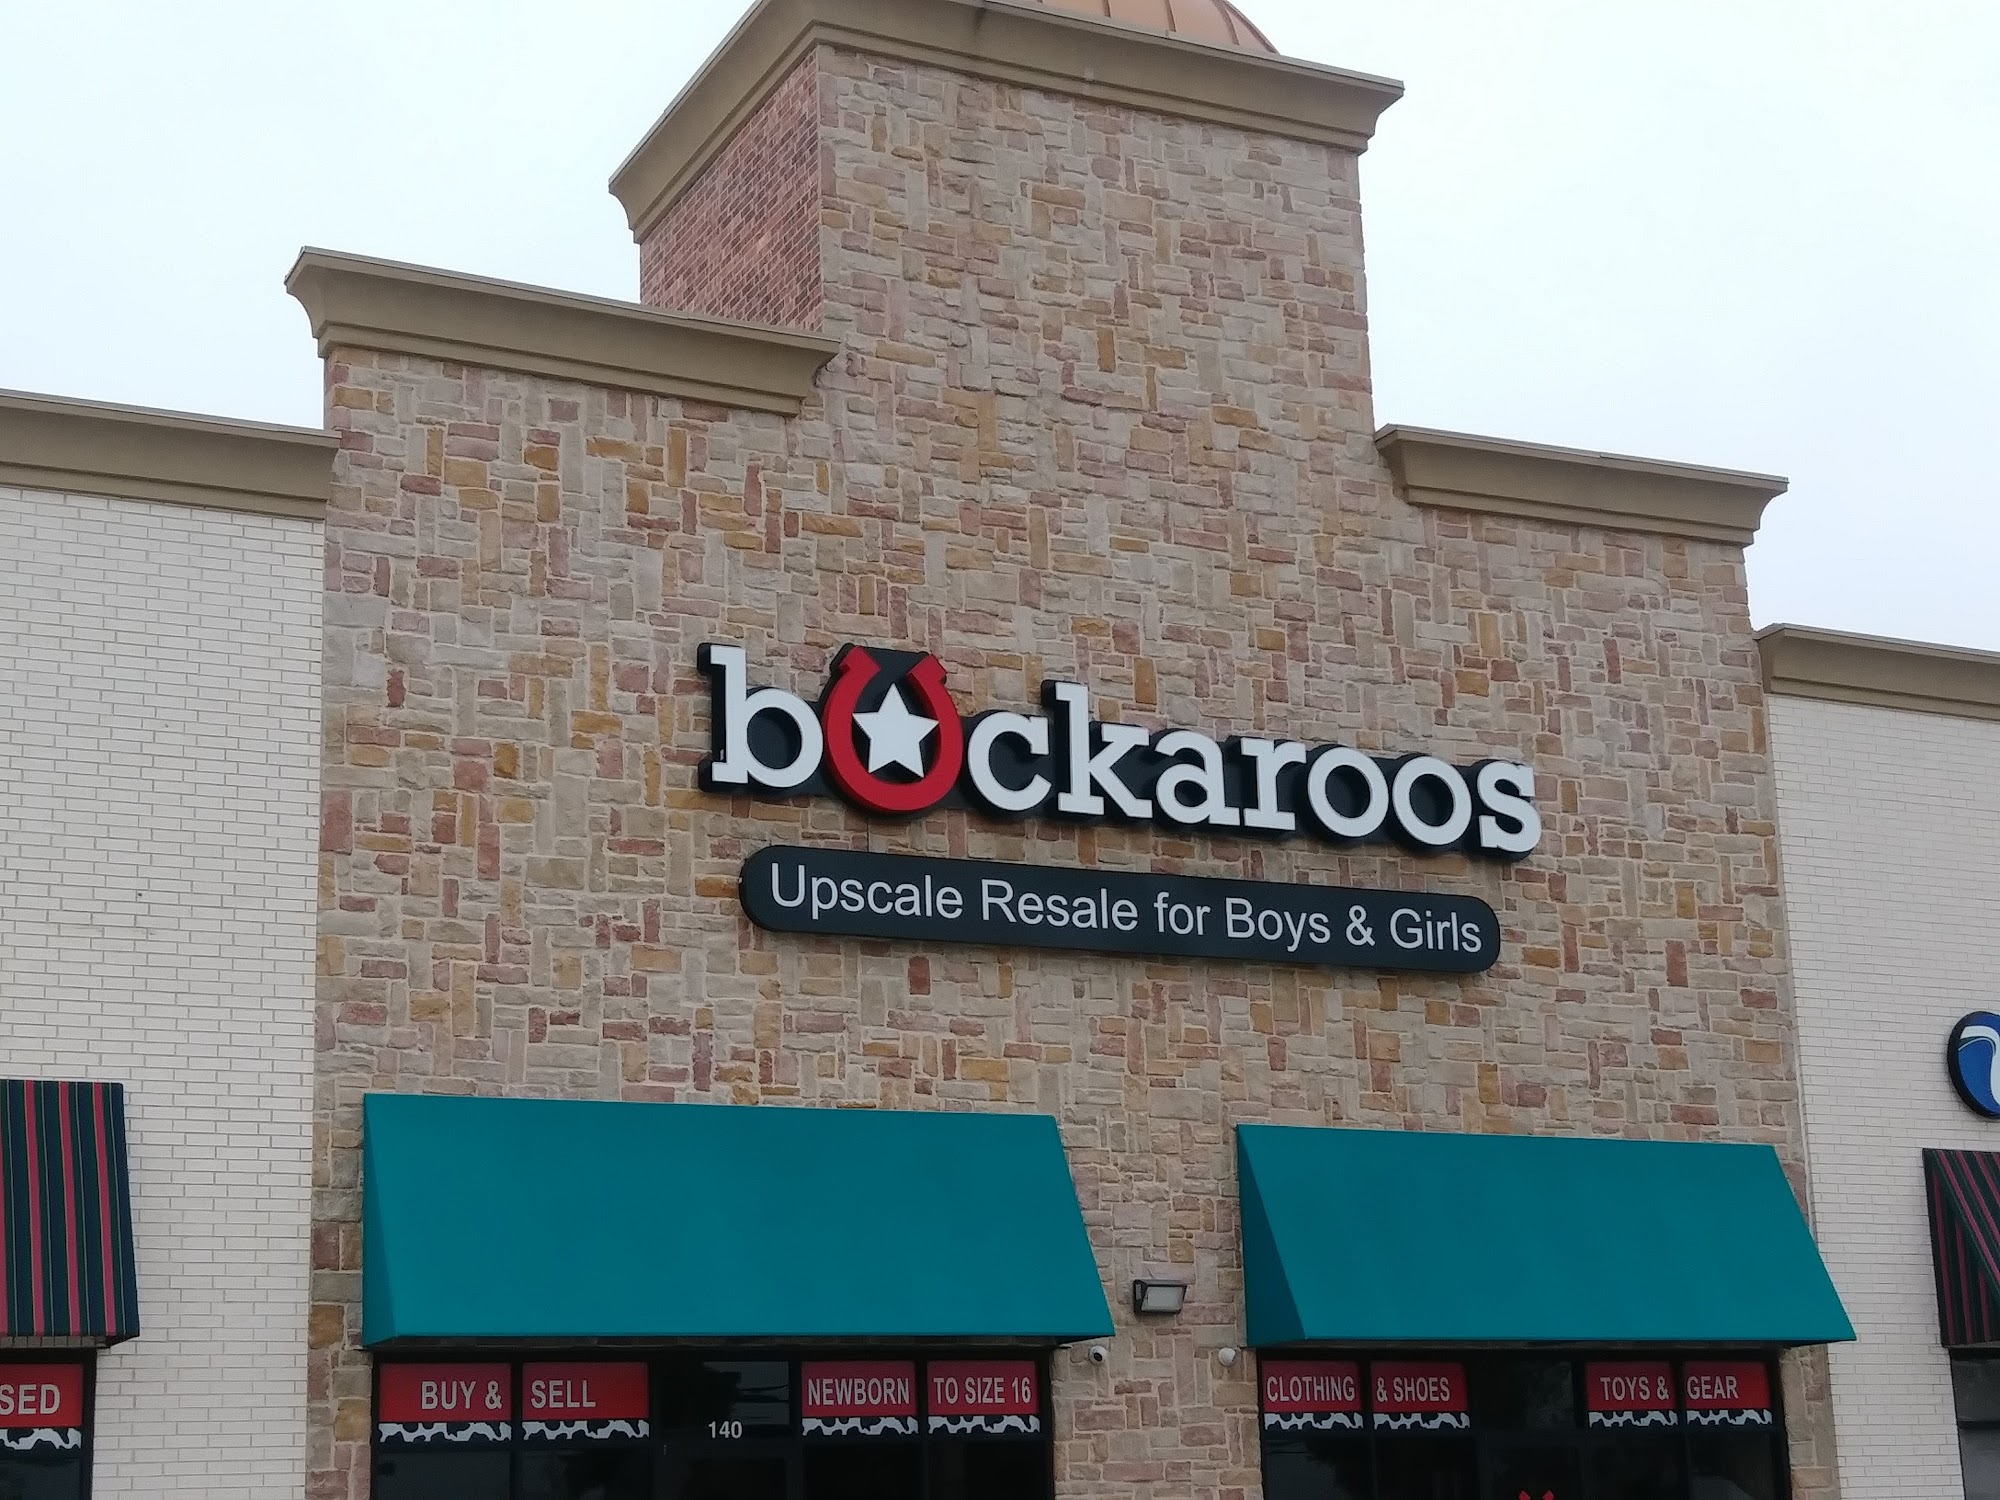 Buckaroos Upscale Resale for Boys and Girls